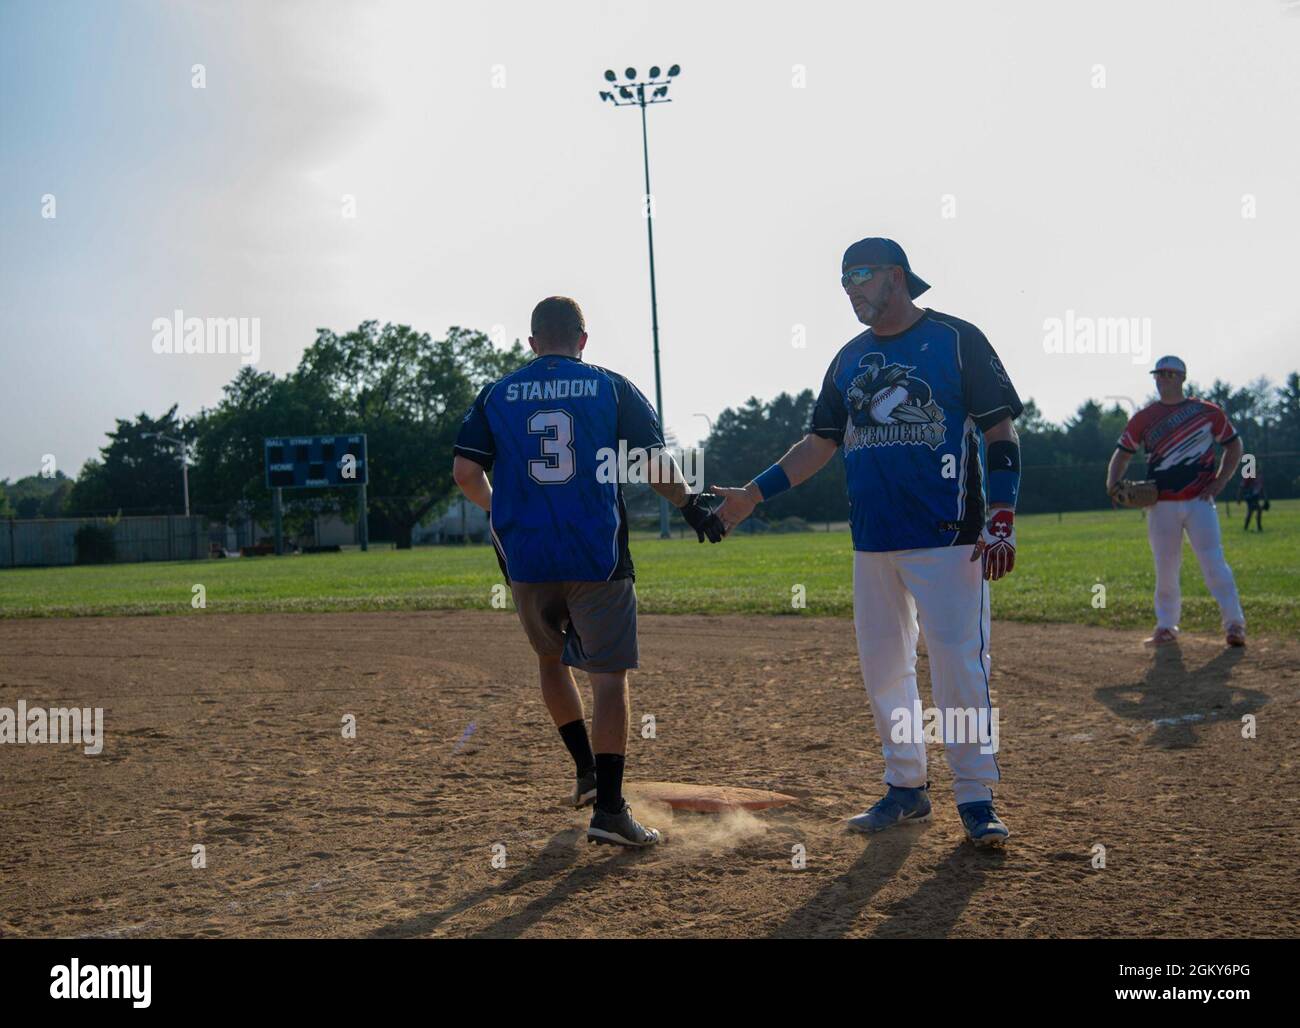 Richard Barker, right, 436th Security Forces Squadron security specialist, high fives Senior Airman Nicholas Standon, 436th SFS response force member, after reaching first base during an intramural softball game against the 436th Maintenance Squadron Isochronal Maintenance Dock on Dover Air Force Base, Delaware, July 26, 2021. The 436th SFS won the game 13-4. Stock Photo